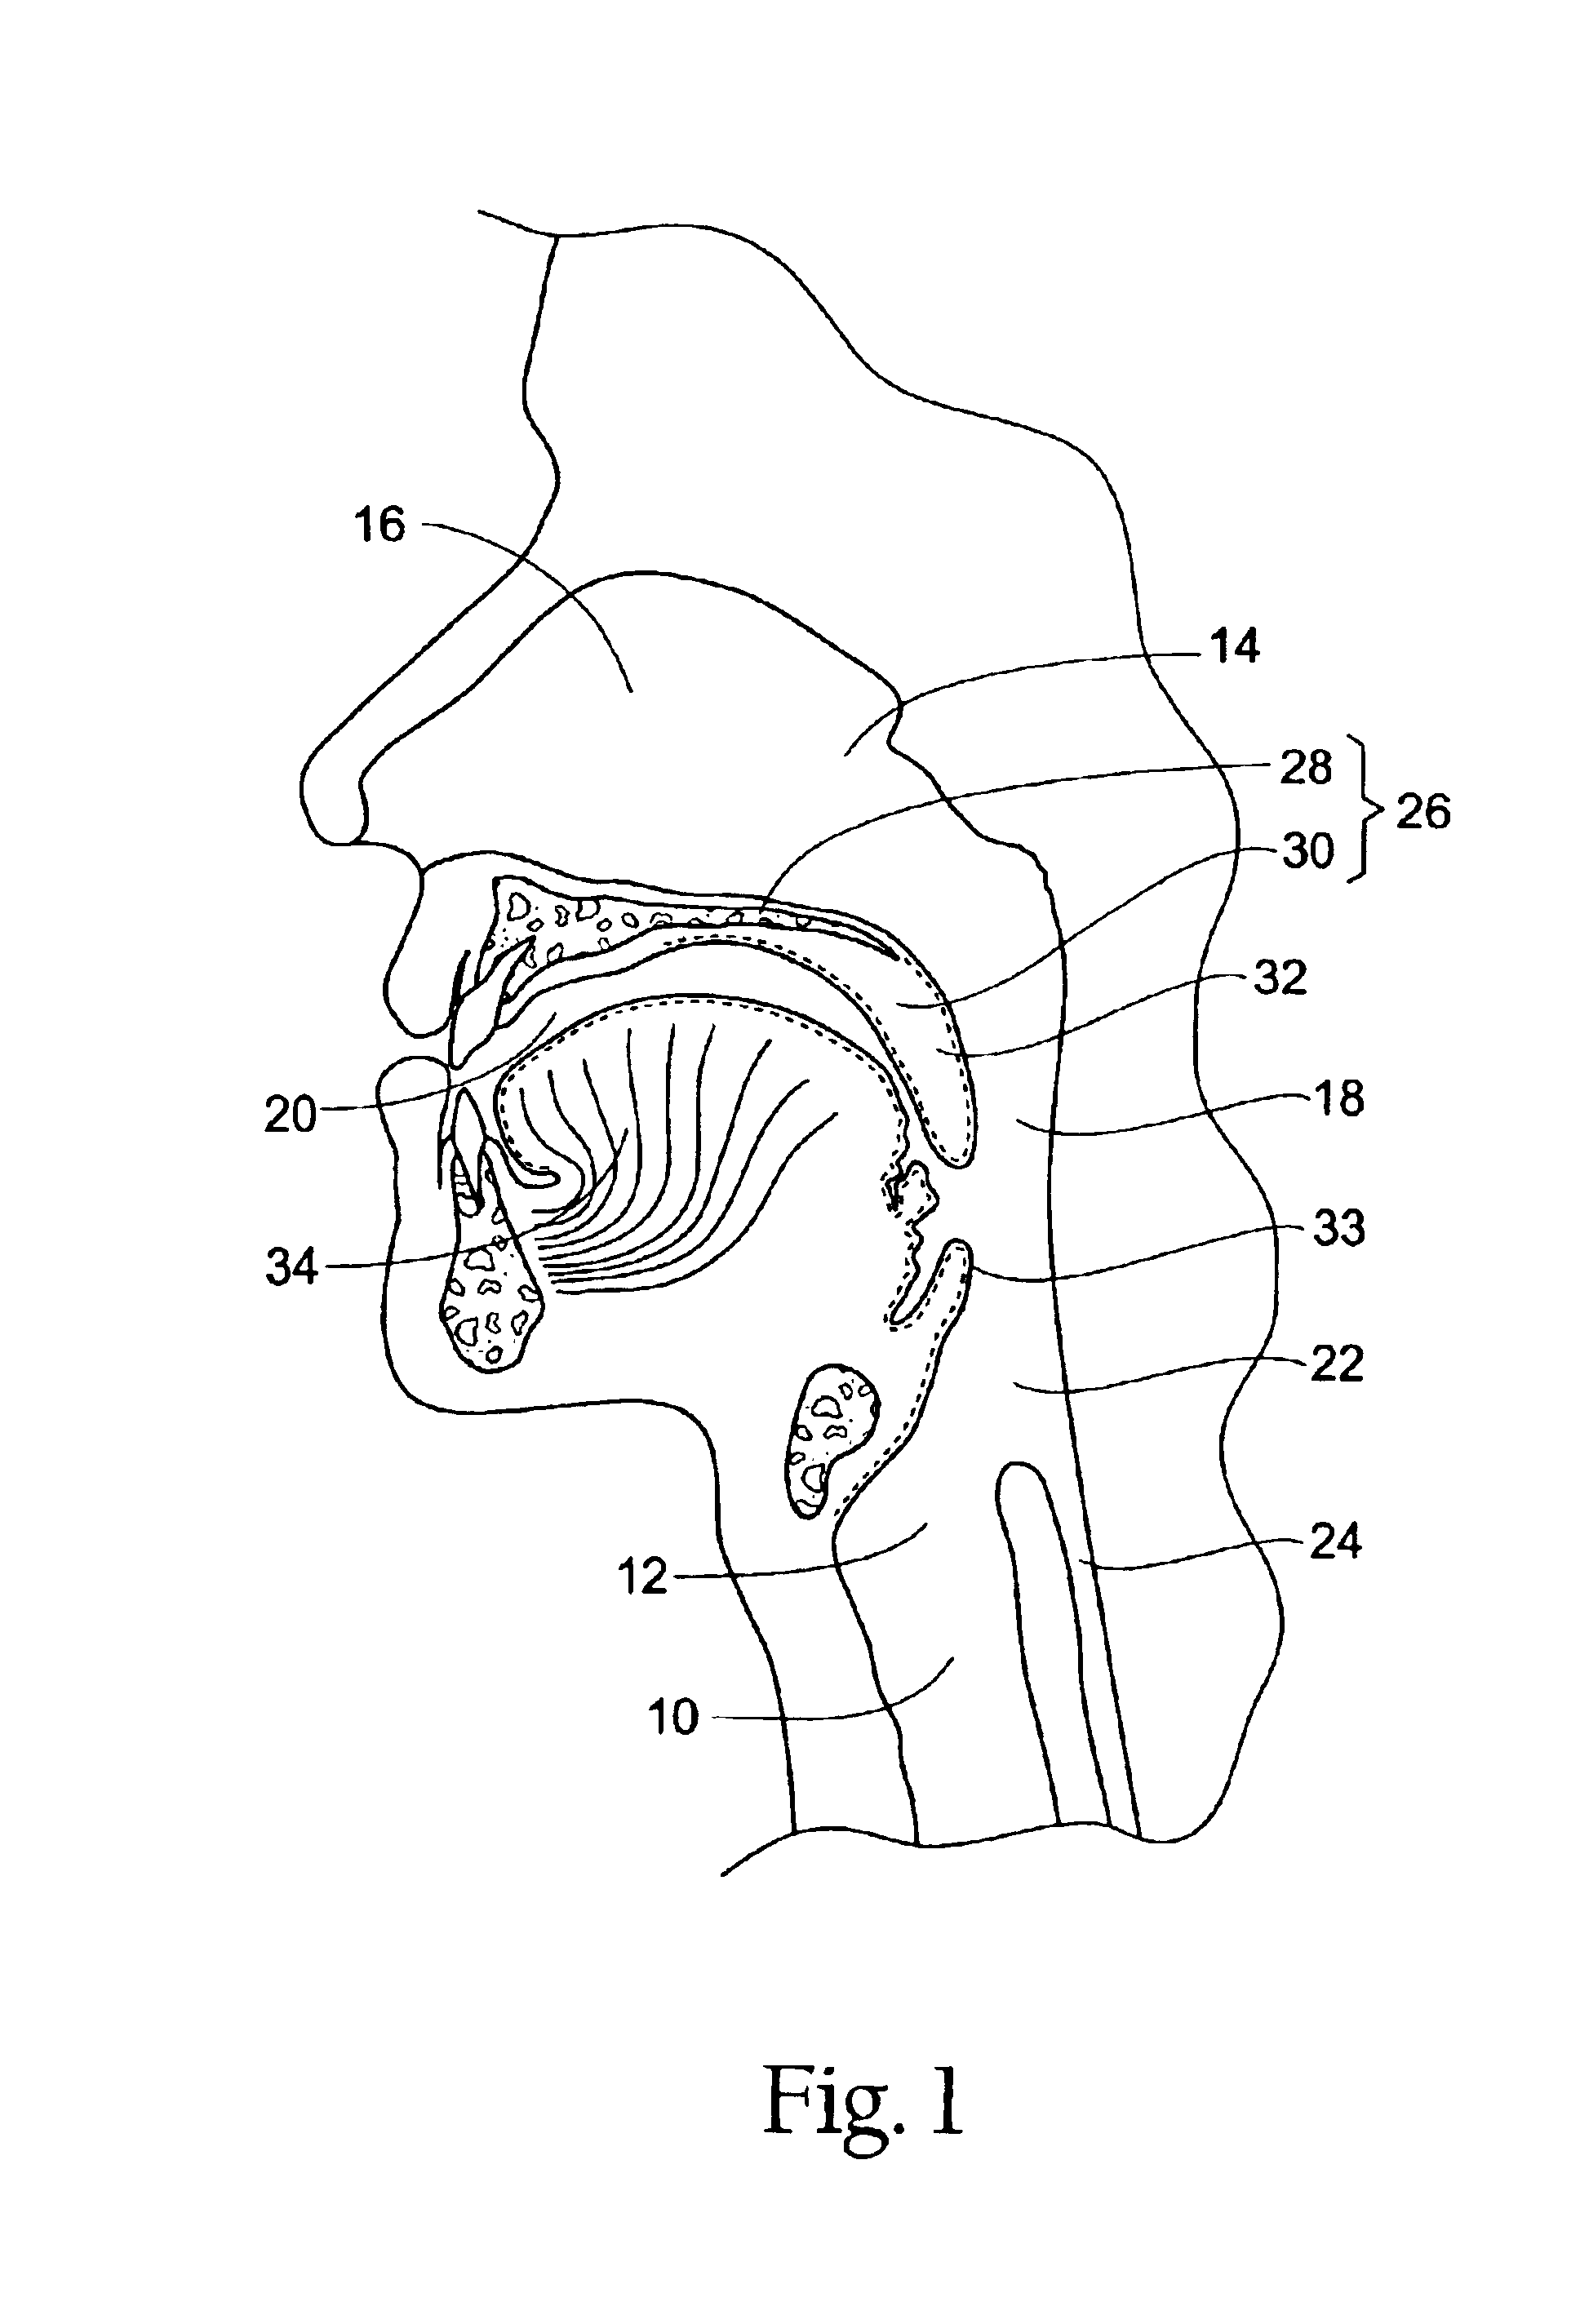 Systems and methods for moving and/or restraining the tongue in the oral cavity